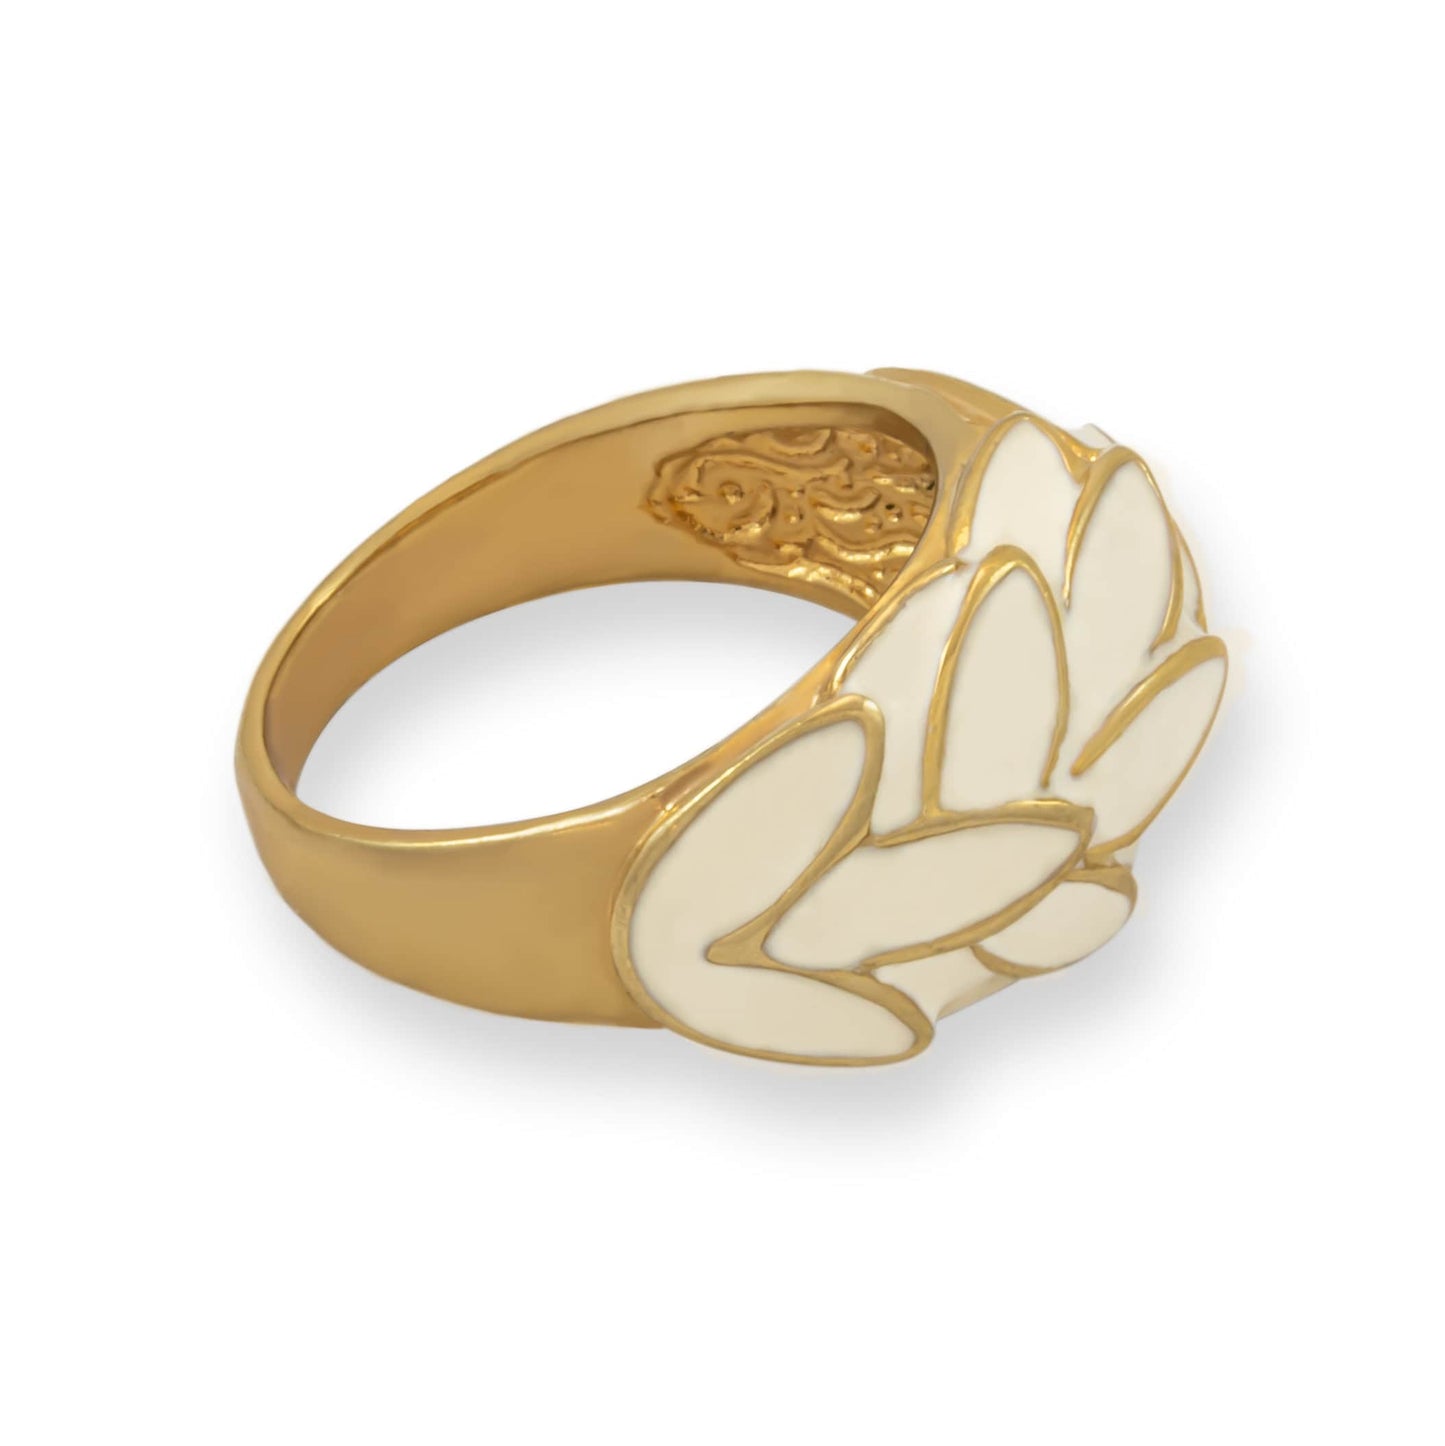 Vintage Ring 1970s White Enamel Leaf Motif 18k Gold Antique Nature Jewlery for Women #R1933 - Limited Stock - Never Worn